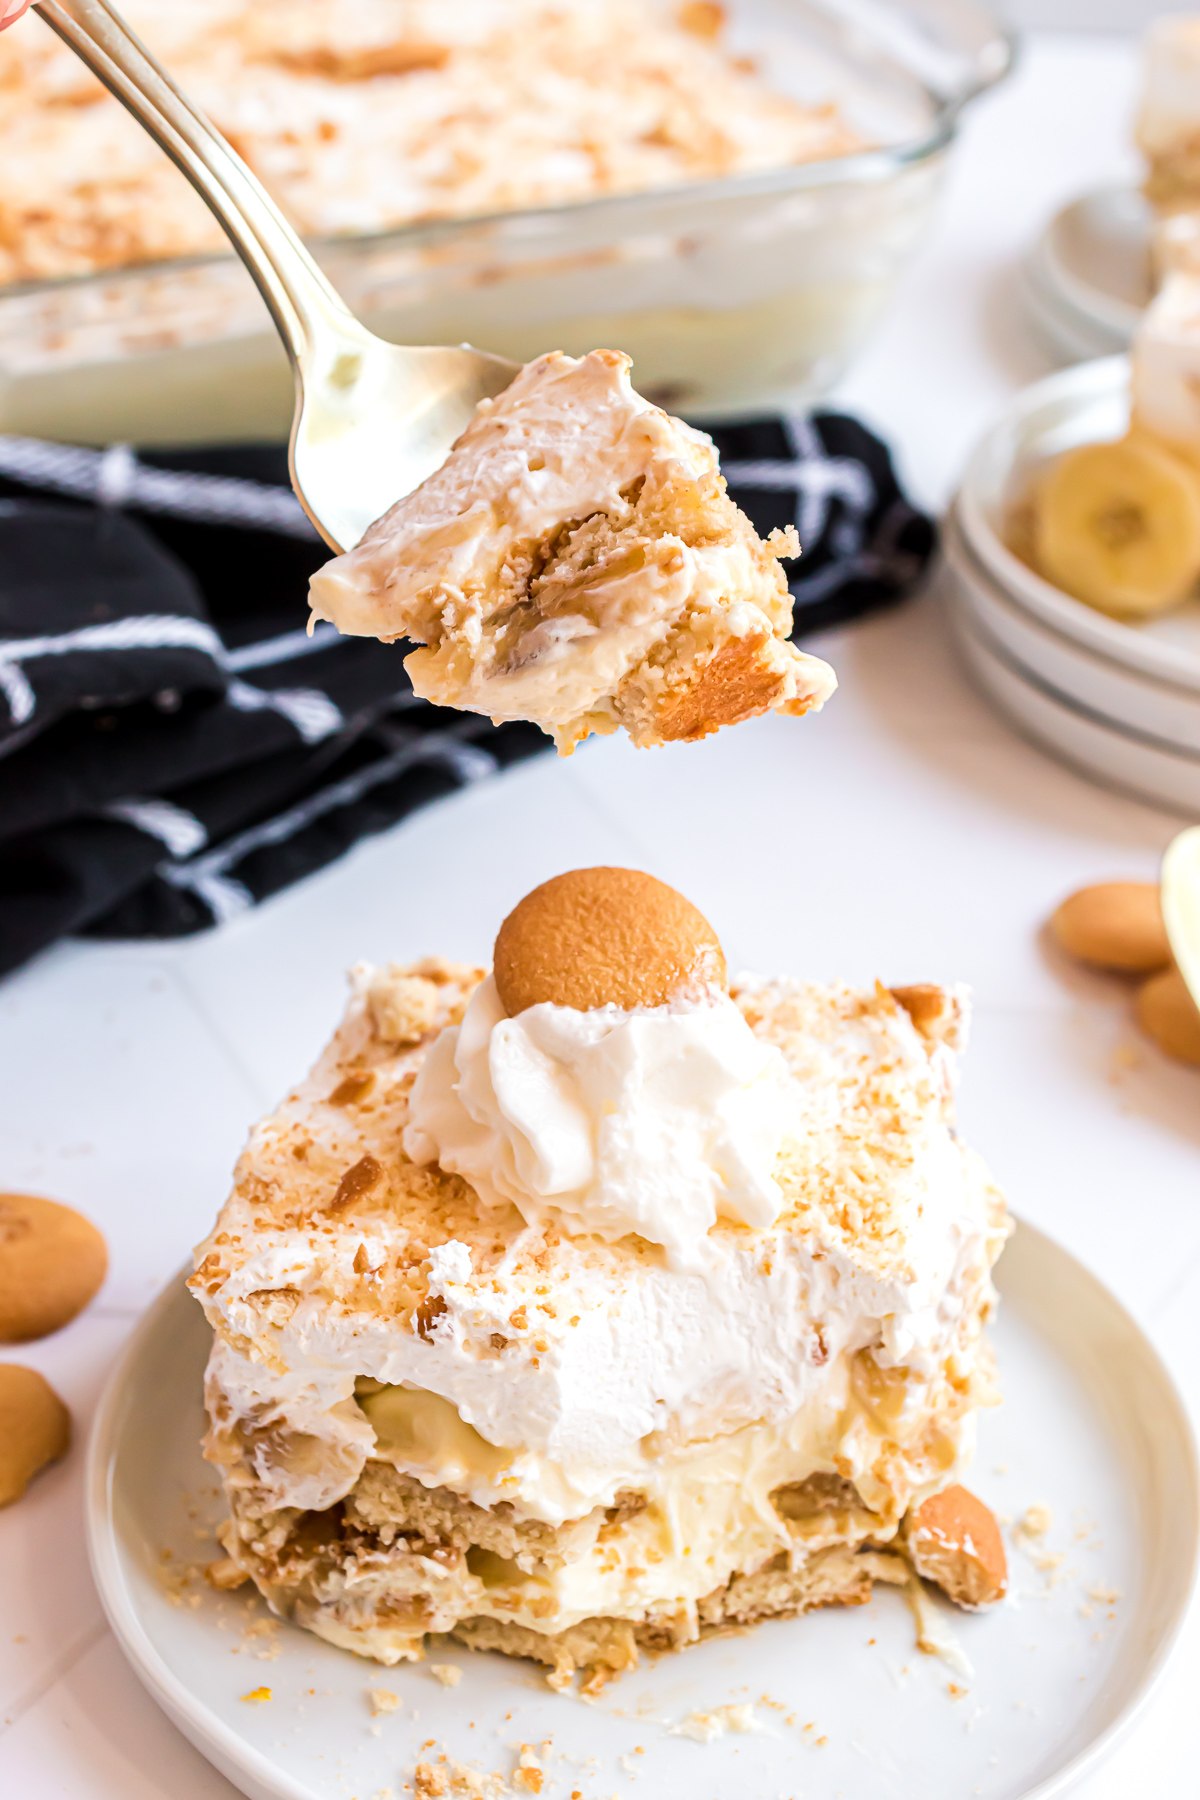 A spoonful of Banana Pudding dessert.